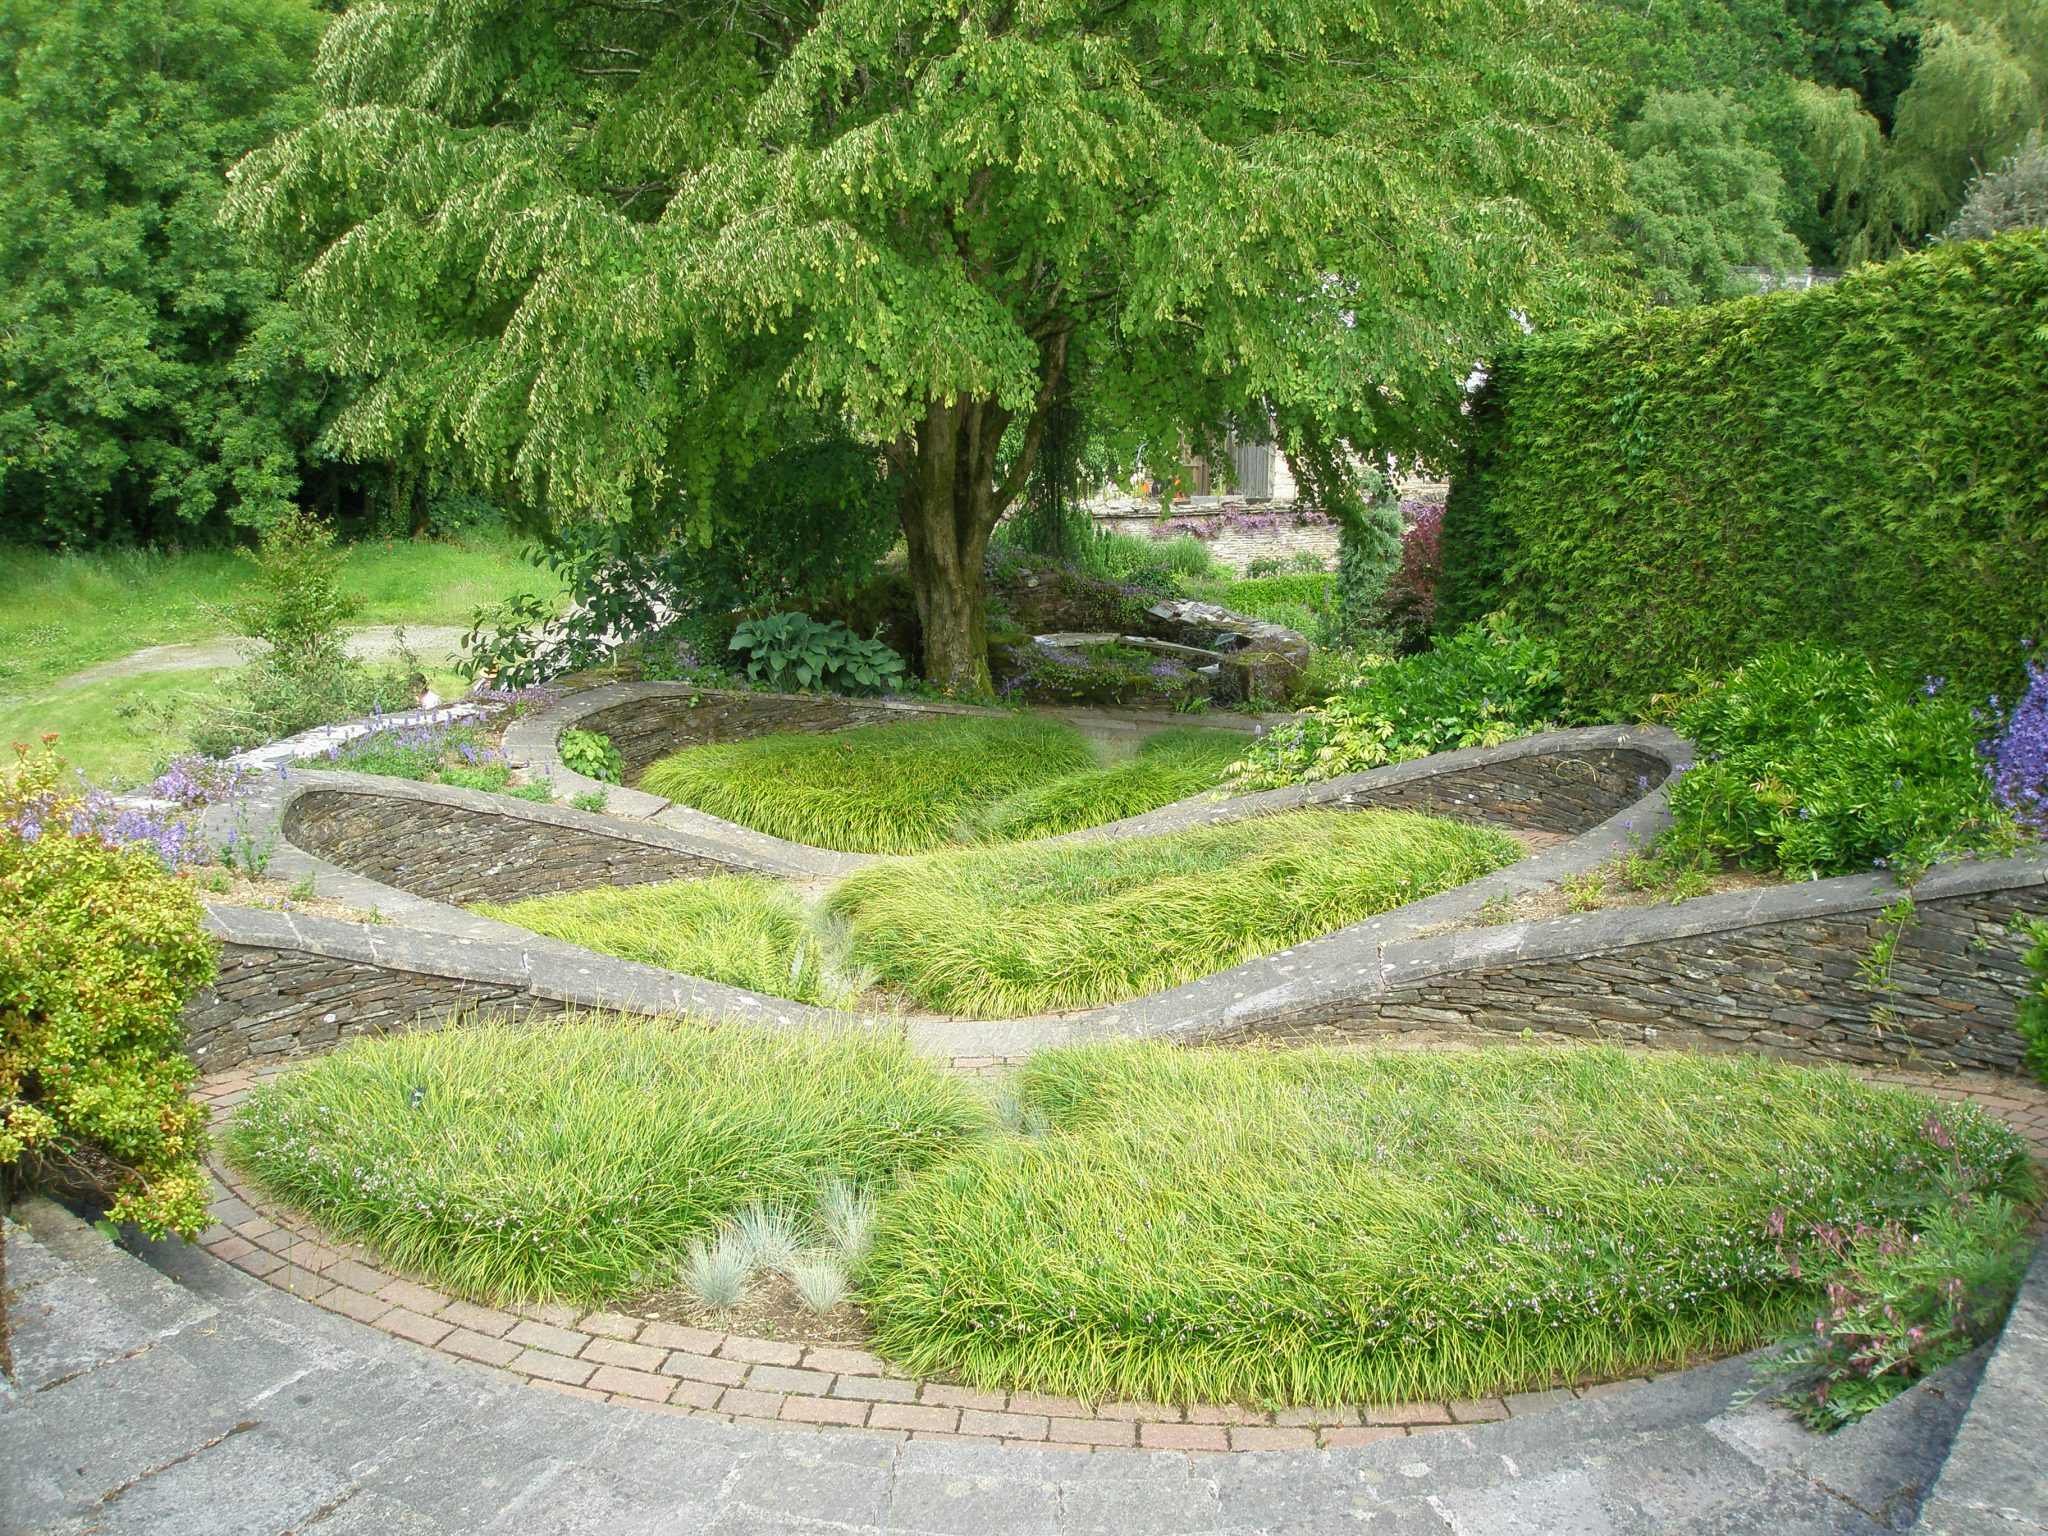 From the western end of the Bowling Green Terrace one first passes through a rustic summerhouse, which opens onto this extraordinary cascade of steps, ramps and raised beds: called THE OVAL GARDEN.